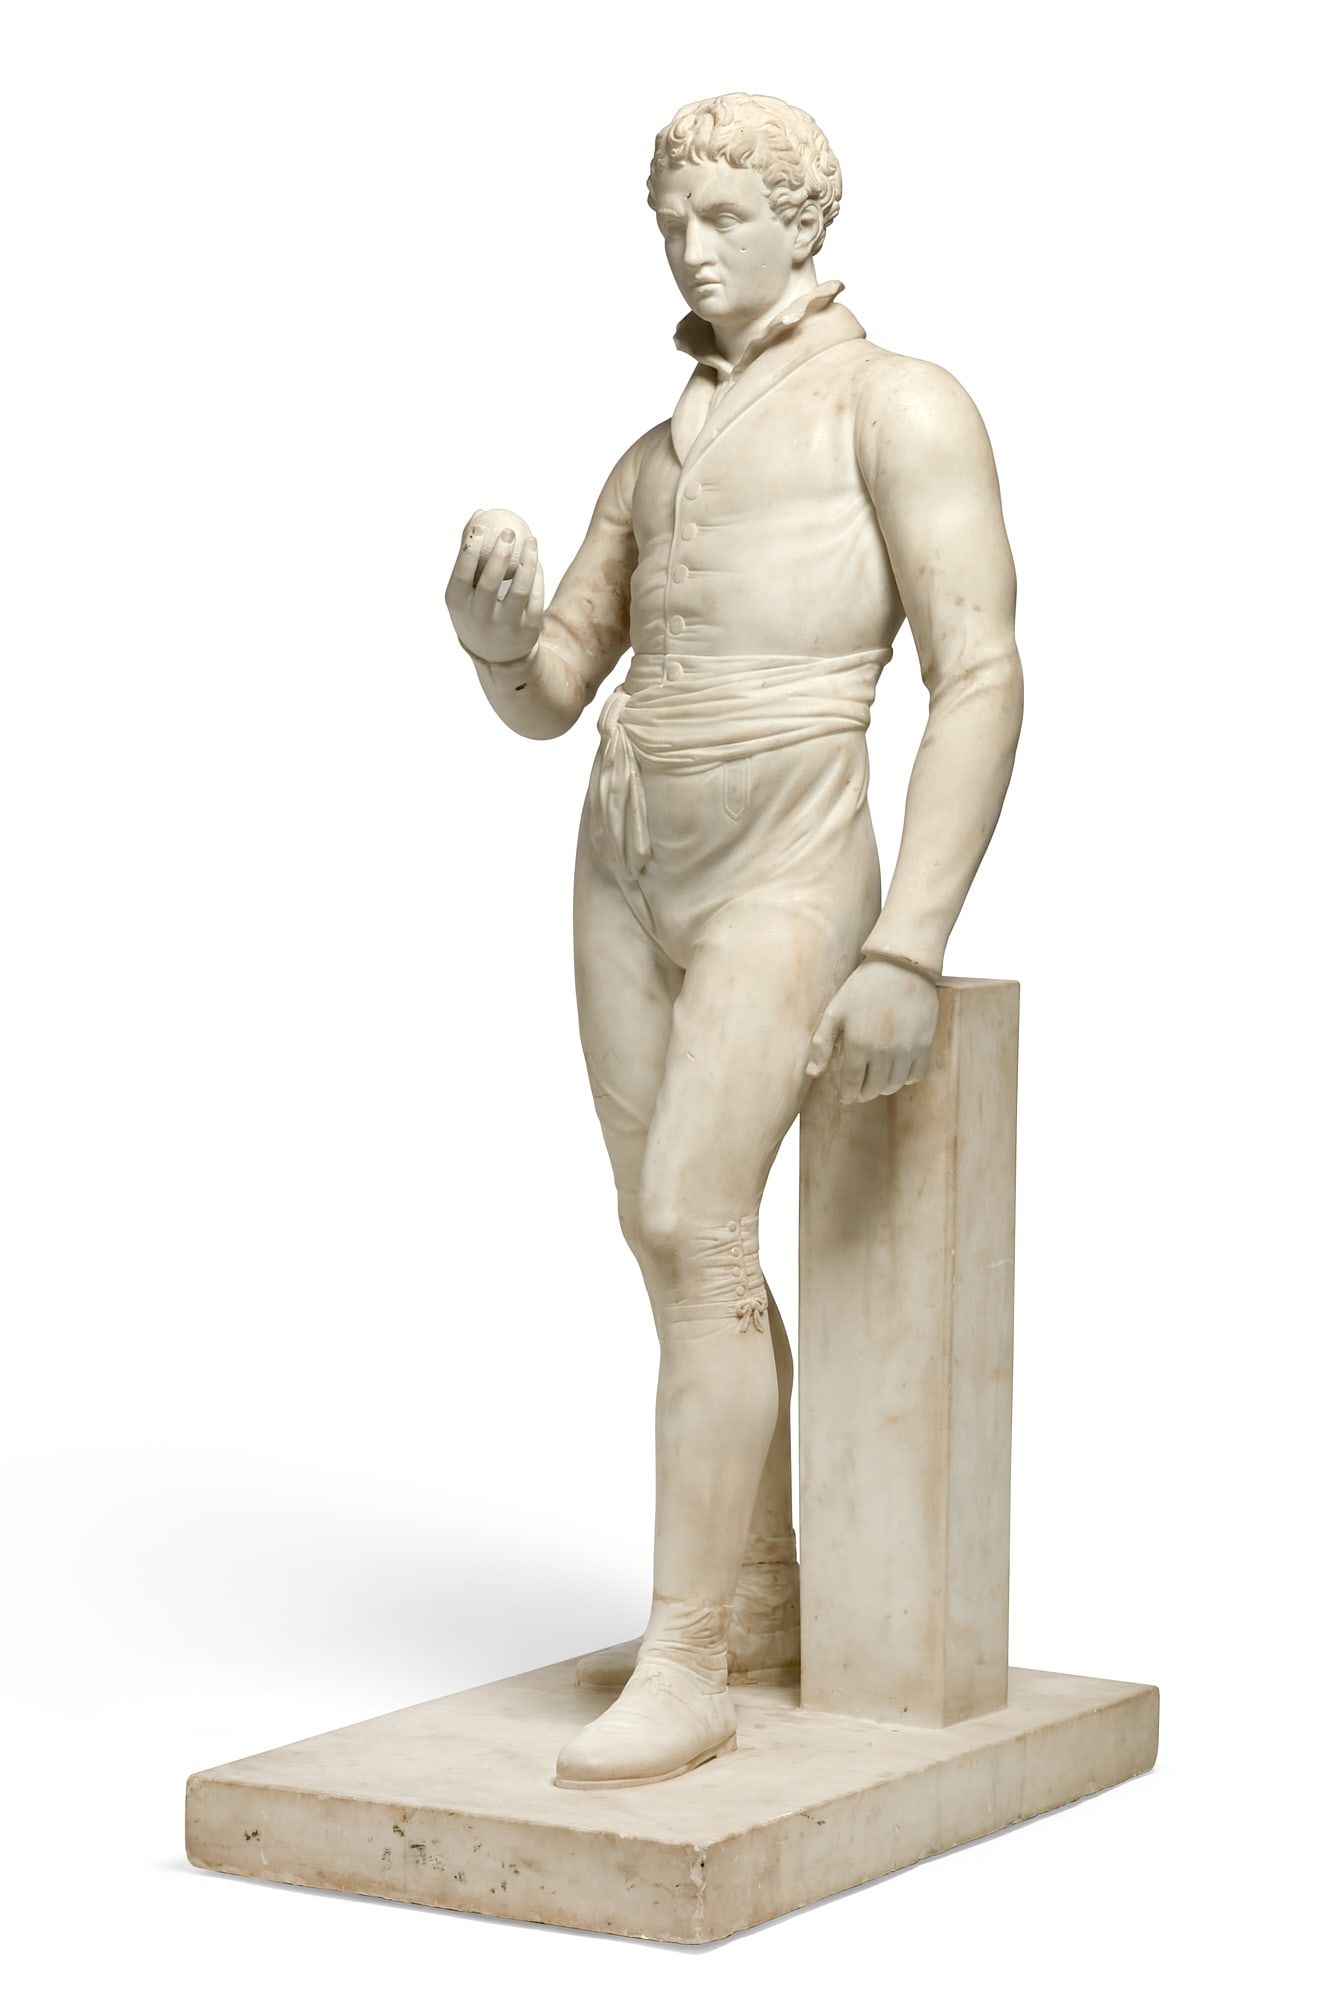 WHITE MARBLE MODEL OF A BOWLER, PROBABLY